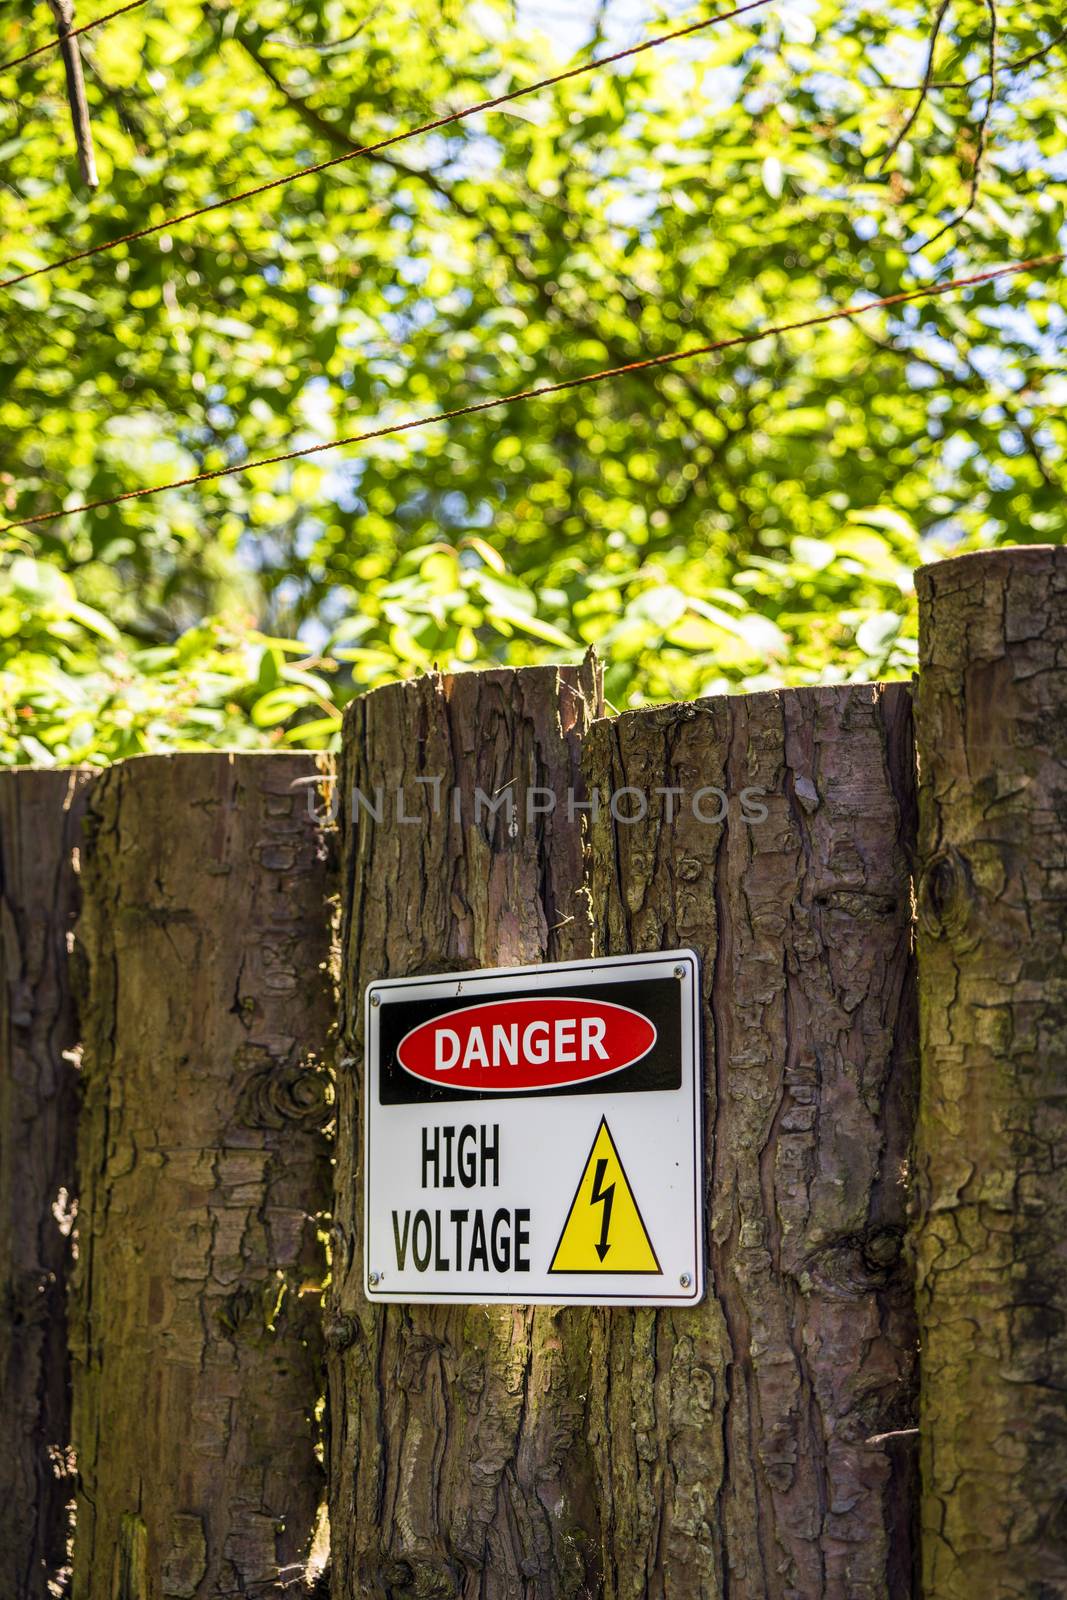 High voltage sign on a wooden fence with electrical wires in a park with green trees